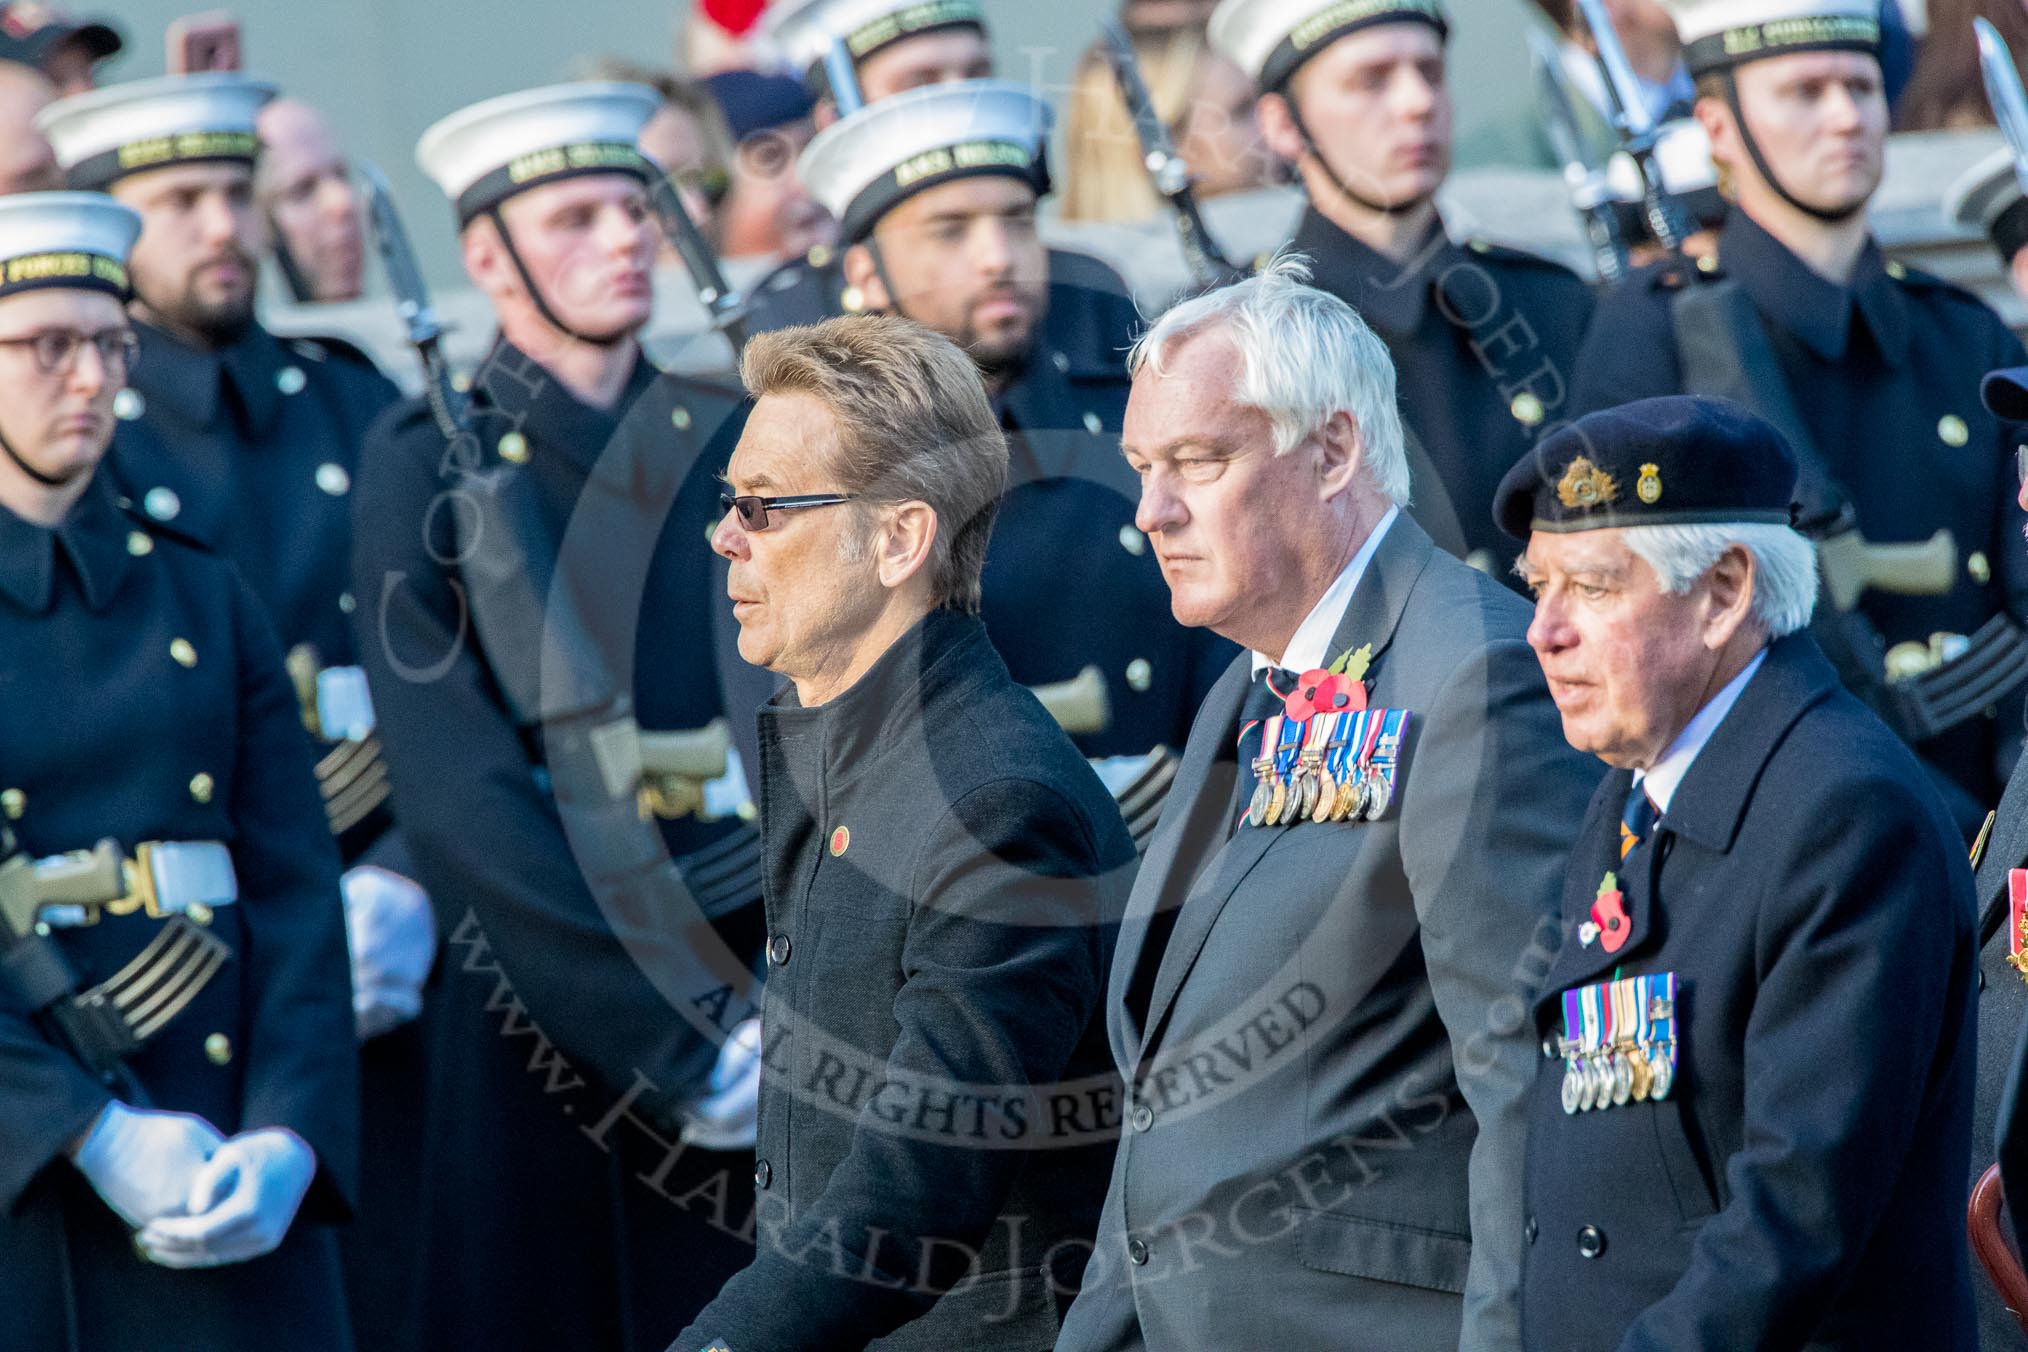 Royal Fleet Auxiliary Association  (Group E33, 15 members) during the Royal British Legion March Past on Remembrance Sunday at the Cenotaph, Whitehall, Westminster, London, 11 November 2018, 11:45.